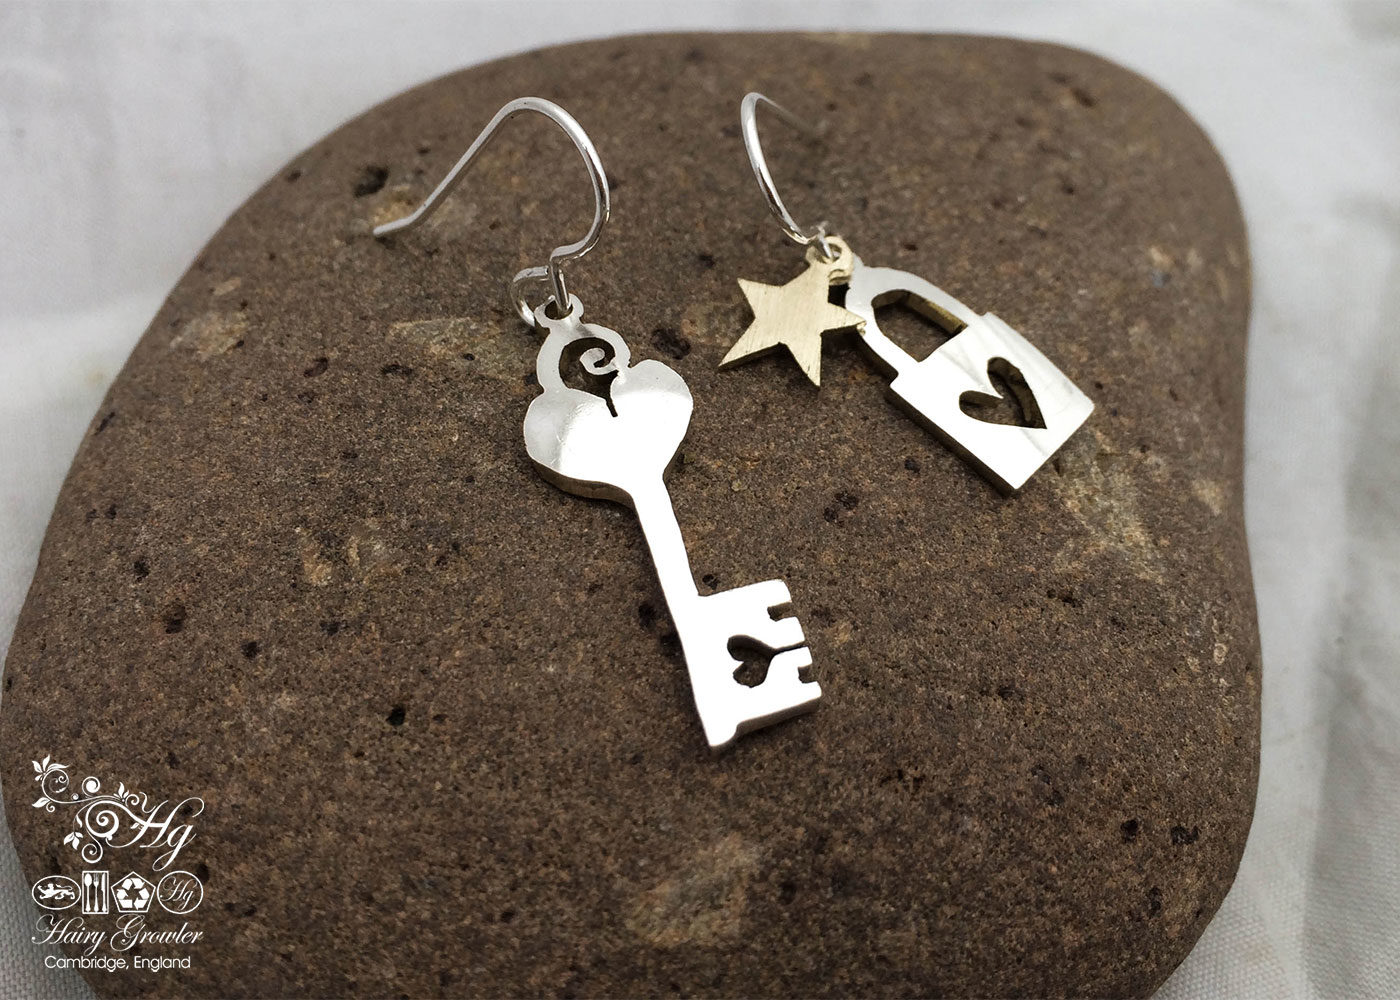 handcrafted and recycled spoon lock-and-key earrings